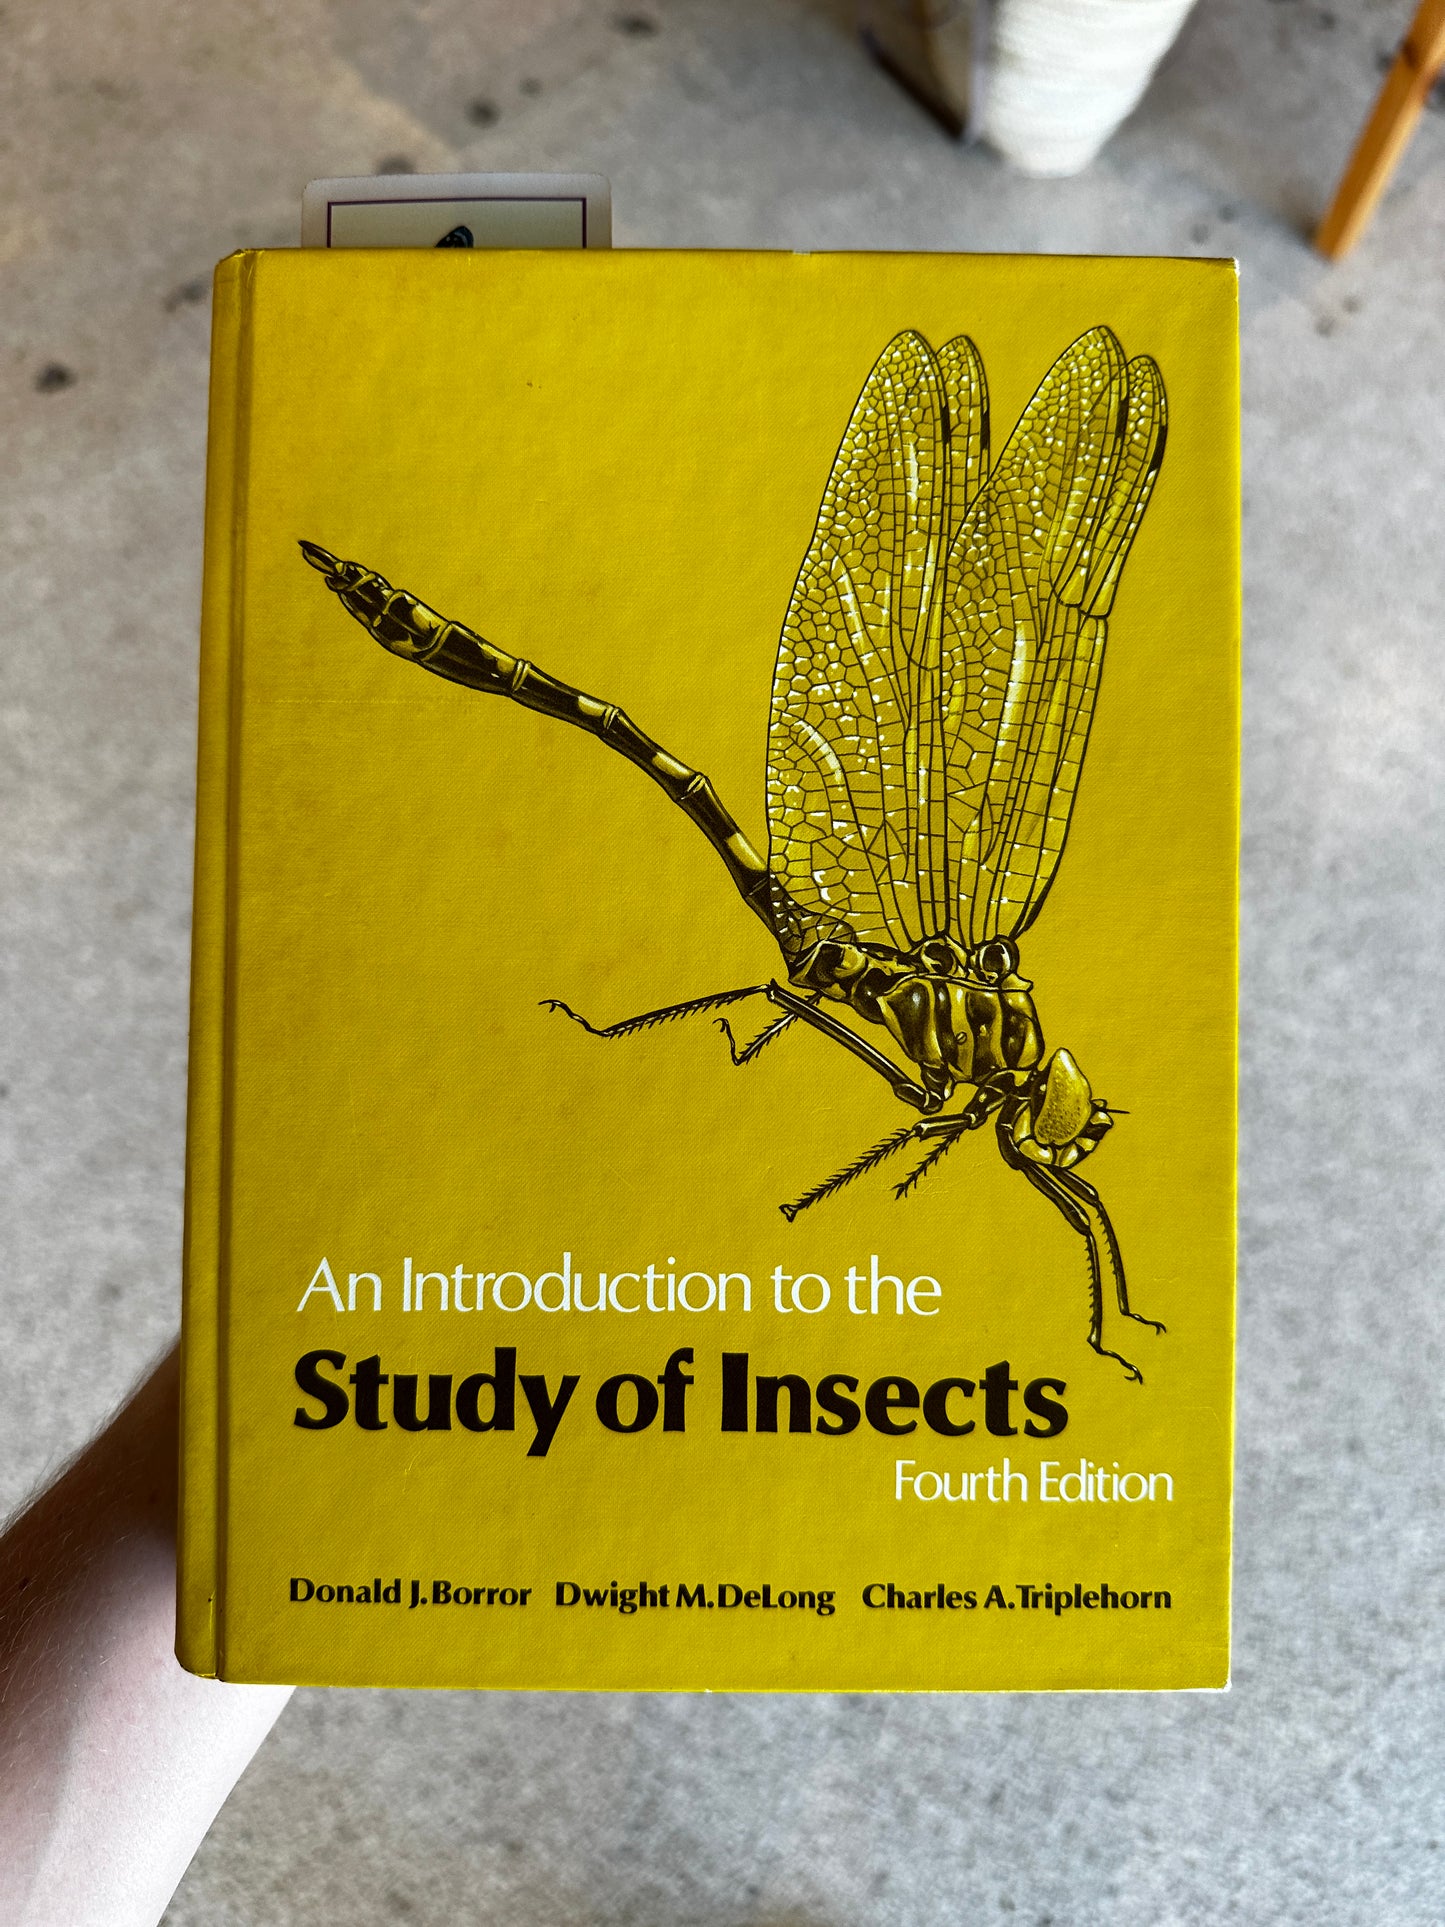 ‘76 “An Intro To The Study Of Insects” Book